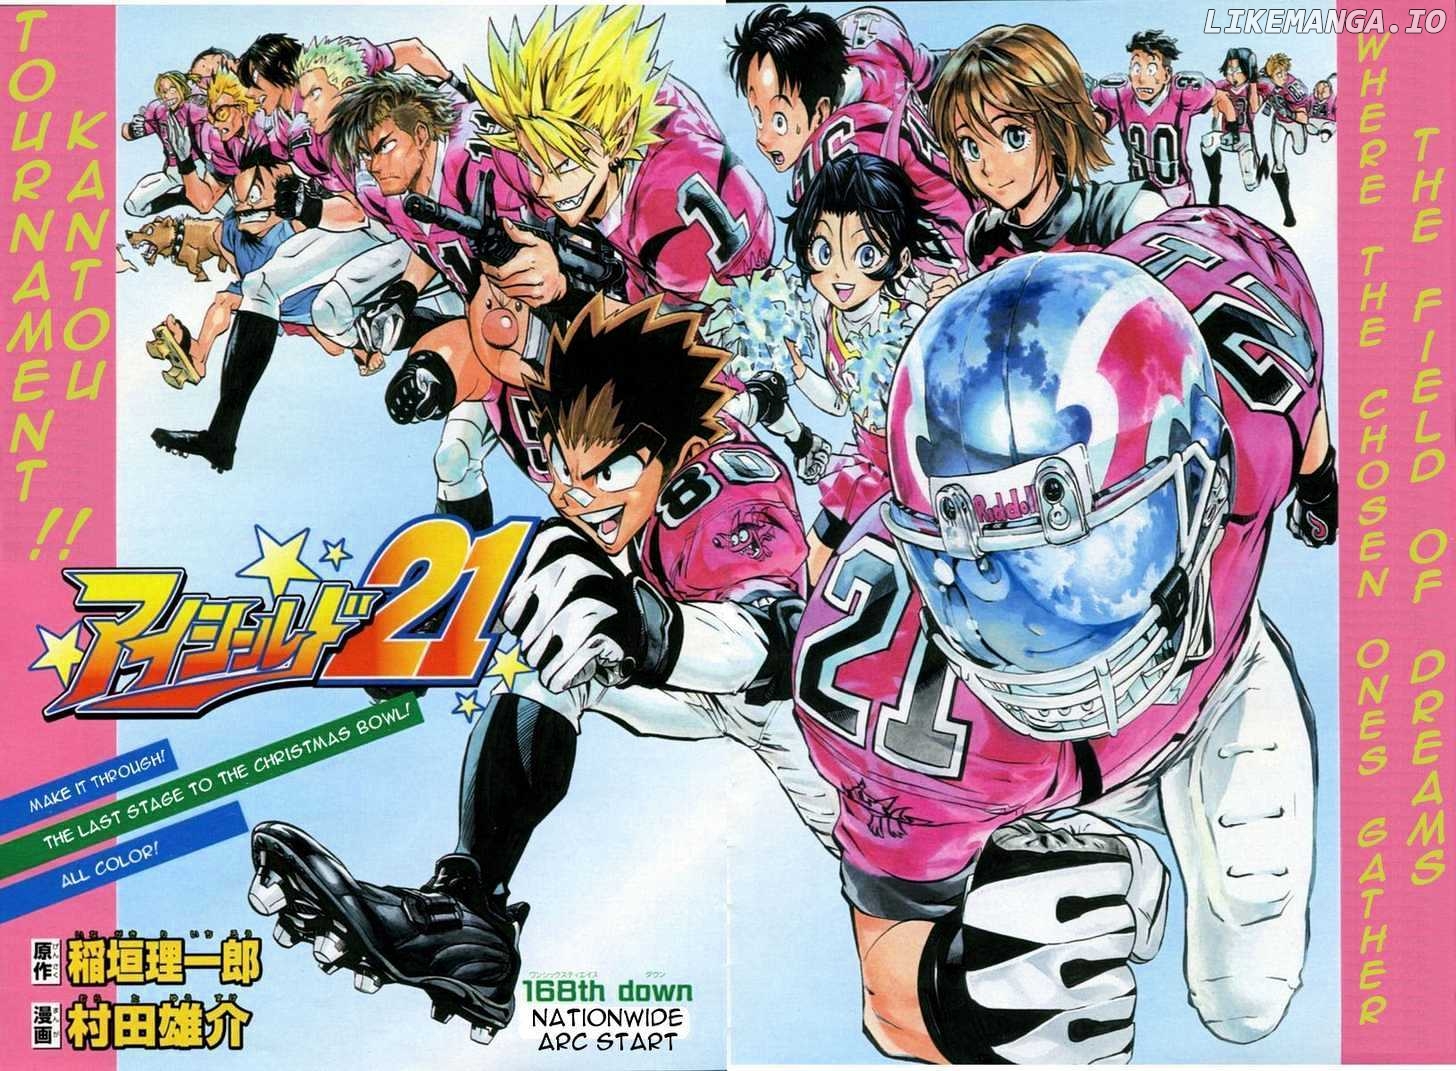 Eyeshield 21 chapter 168-169 - page 3